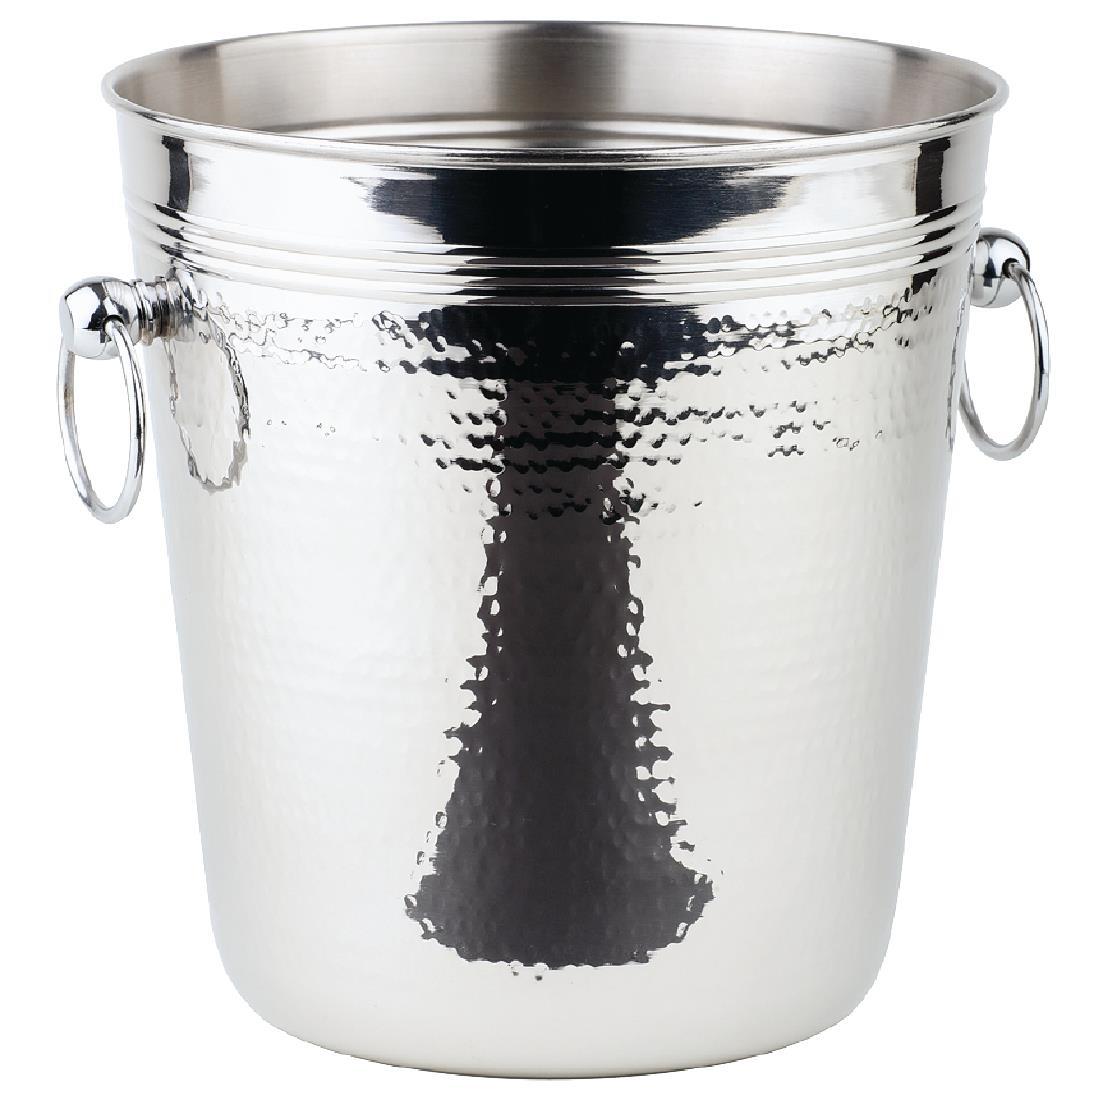 APS Hammered Stainless Steel Wine And Champagne Bucket - CB883  - 1